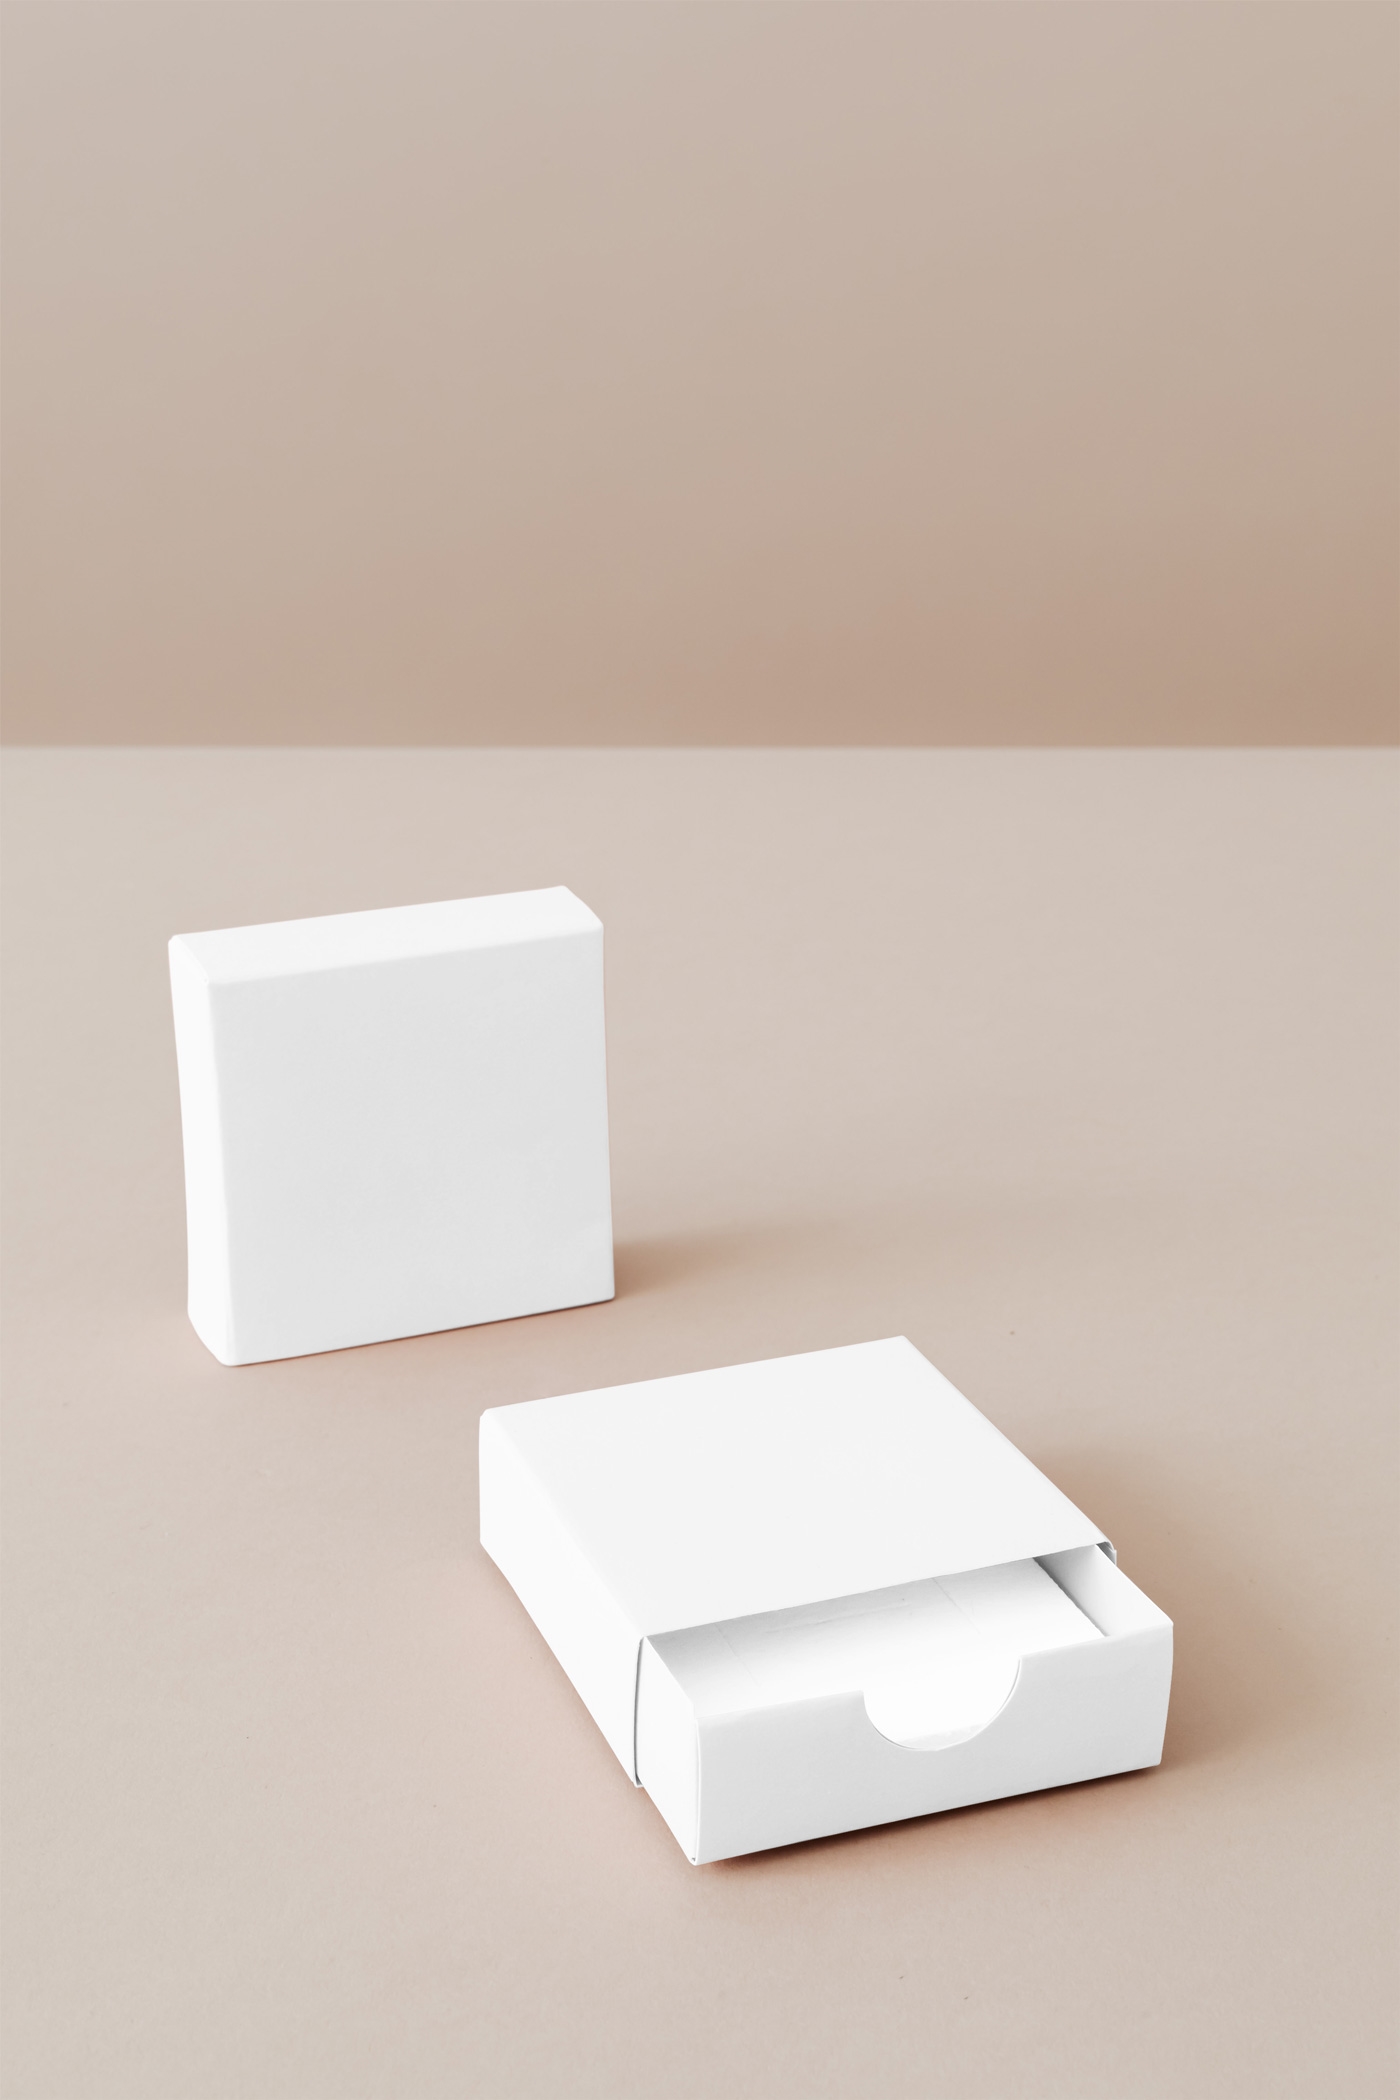 2 Square Small Boxes Mockup in Perspective Sight FREE PSD